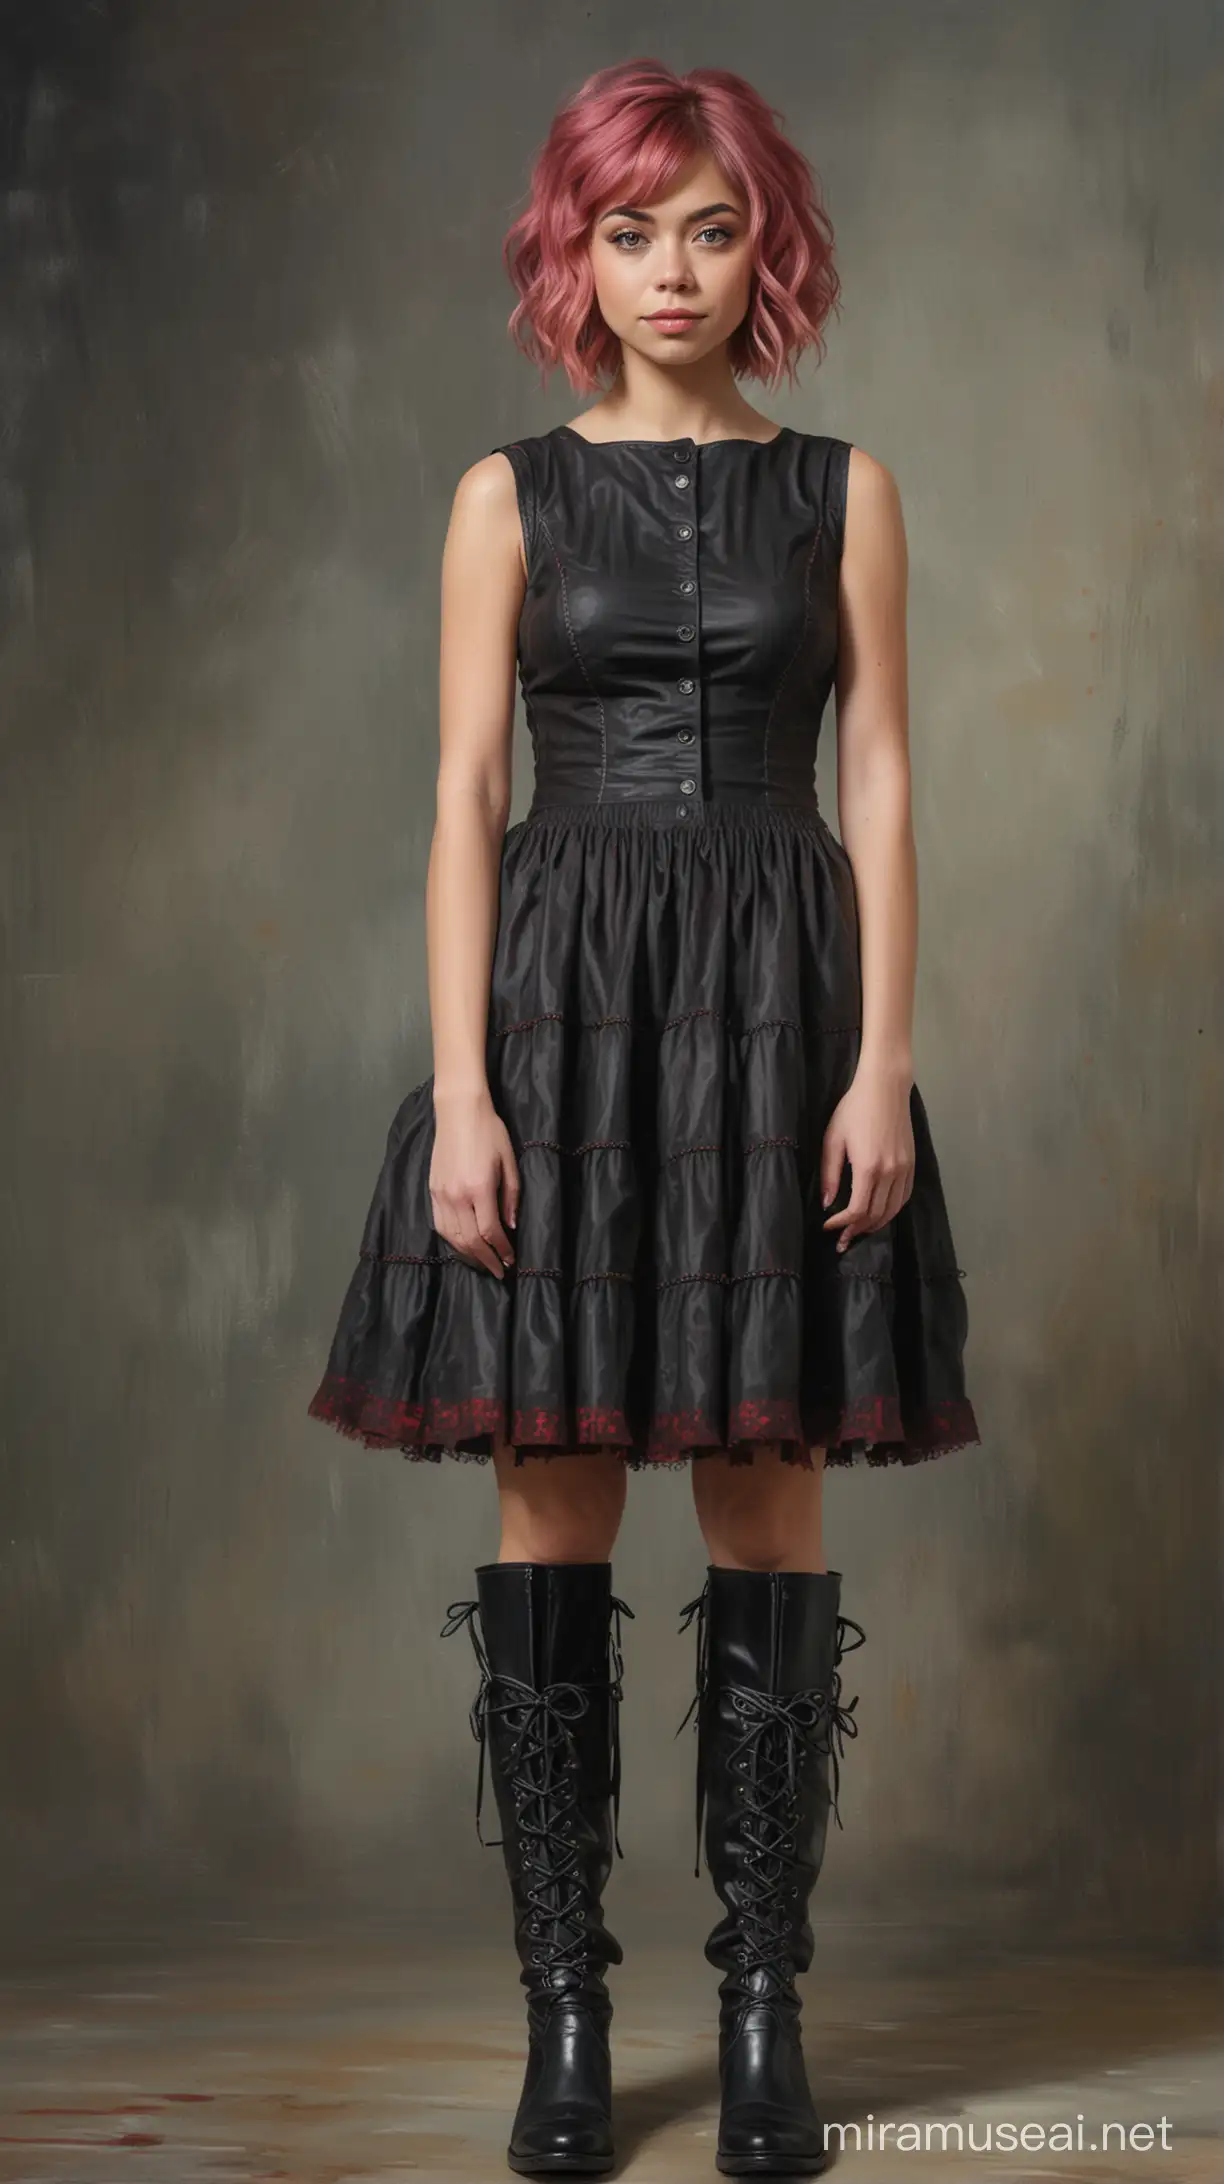 Classical Oil Impressionist Portrait Sarah Hyland with Pink Hair and Gothic Dress